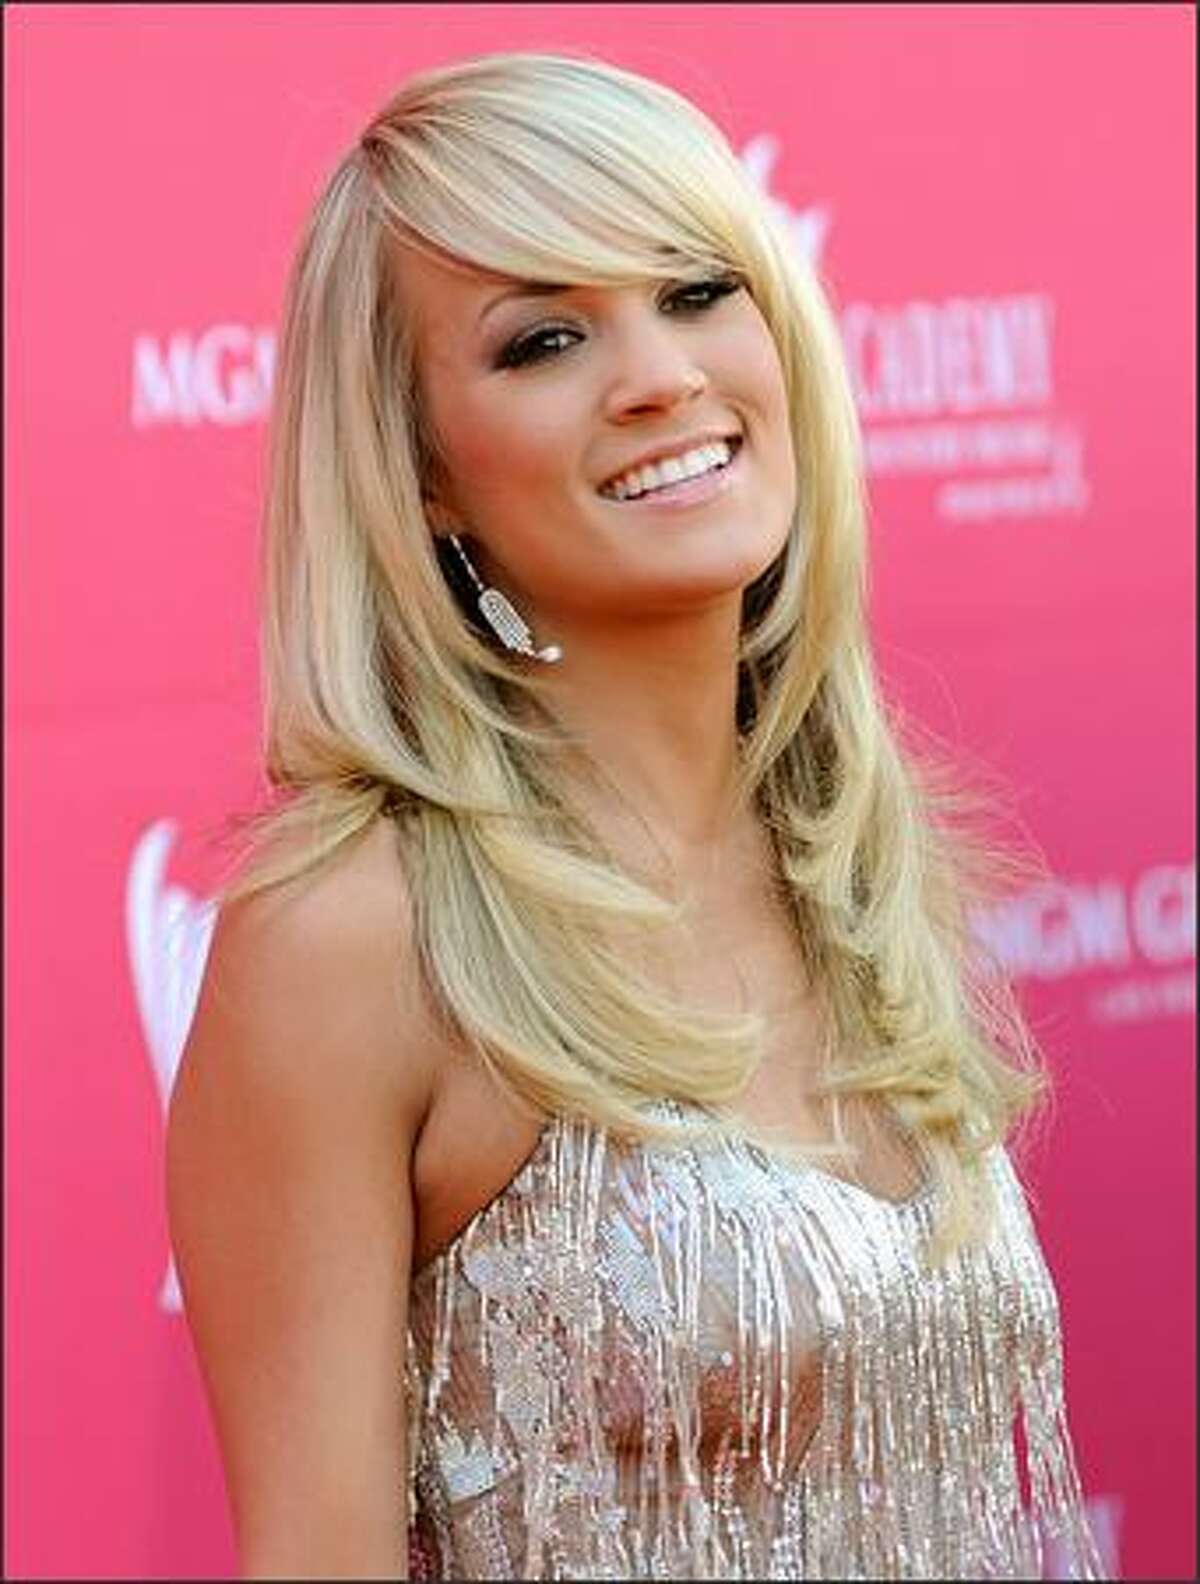 Singer Carrie Underwood arrives at the 43rd annual Academy of Country Music Awards in Las Vegas.